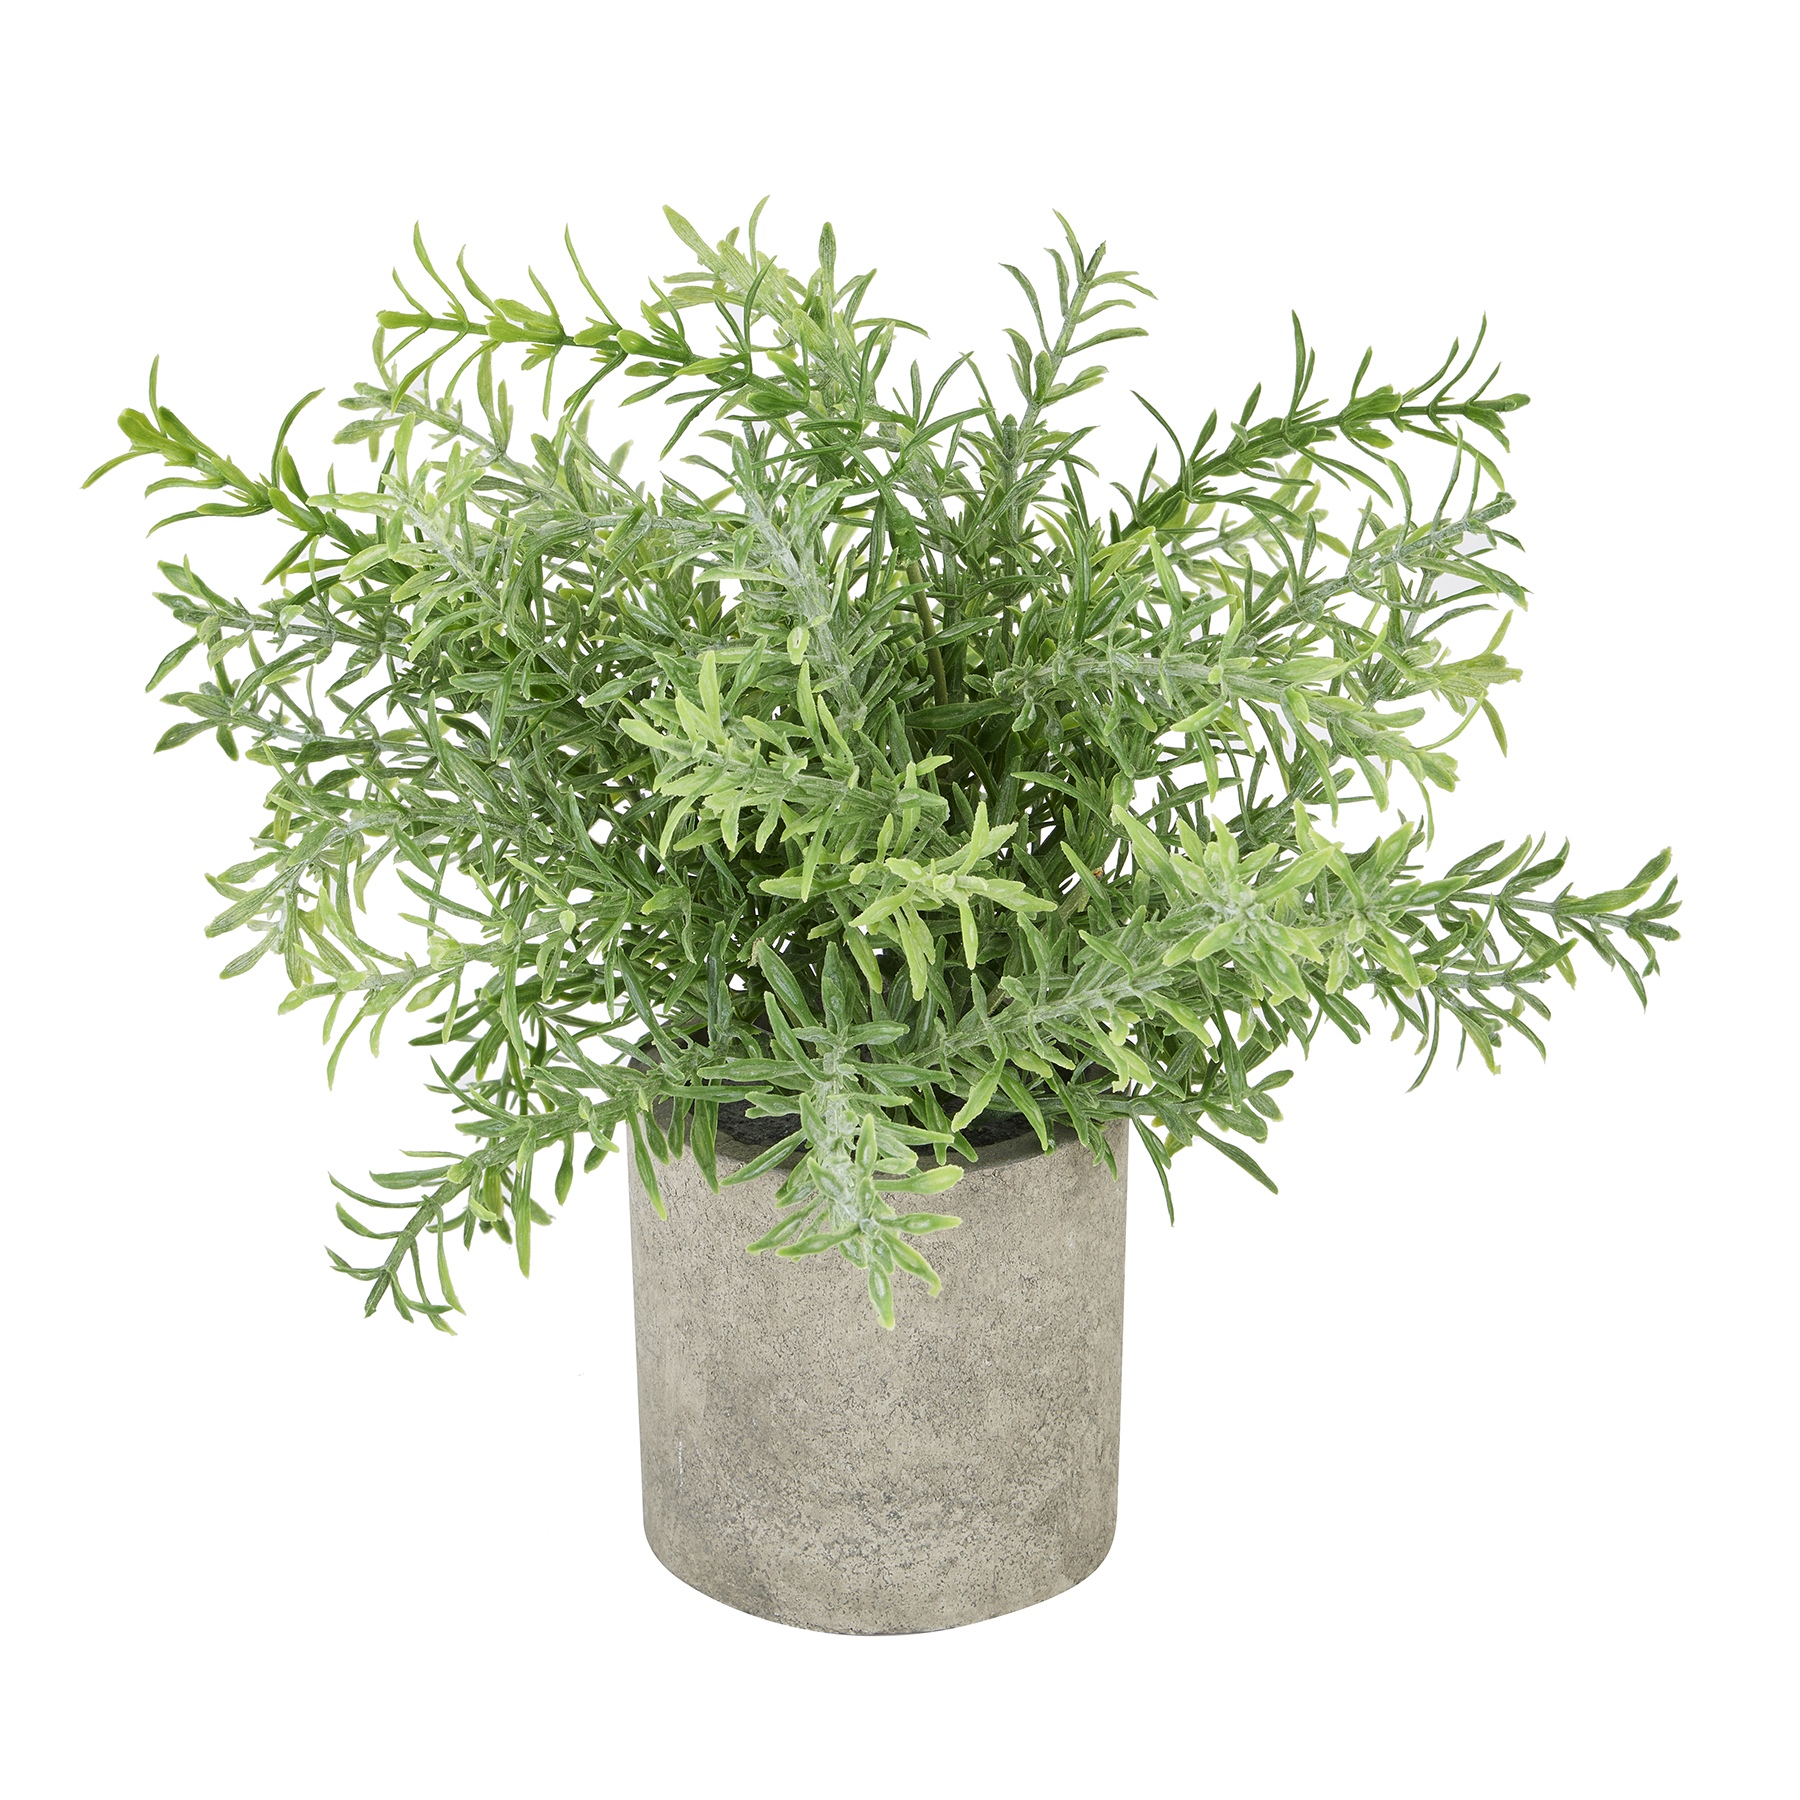 Rosemary Plant In Stone Effect Pot - Image 1